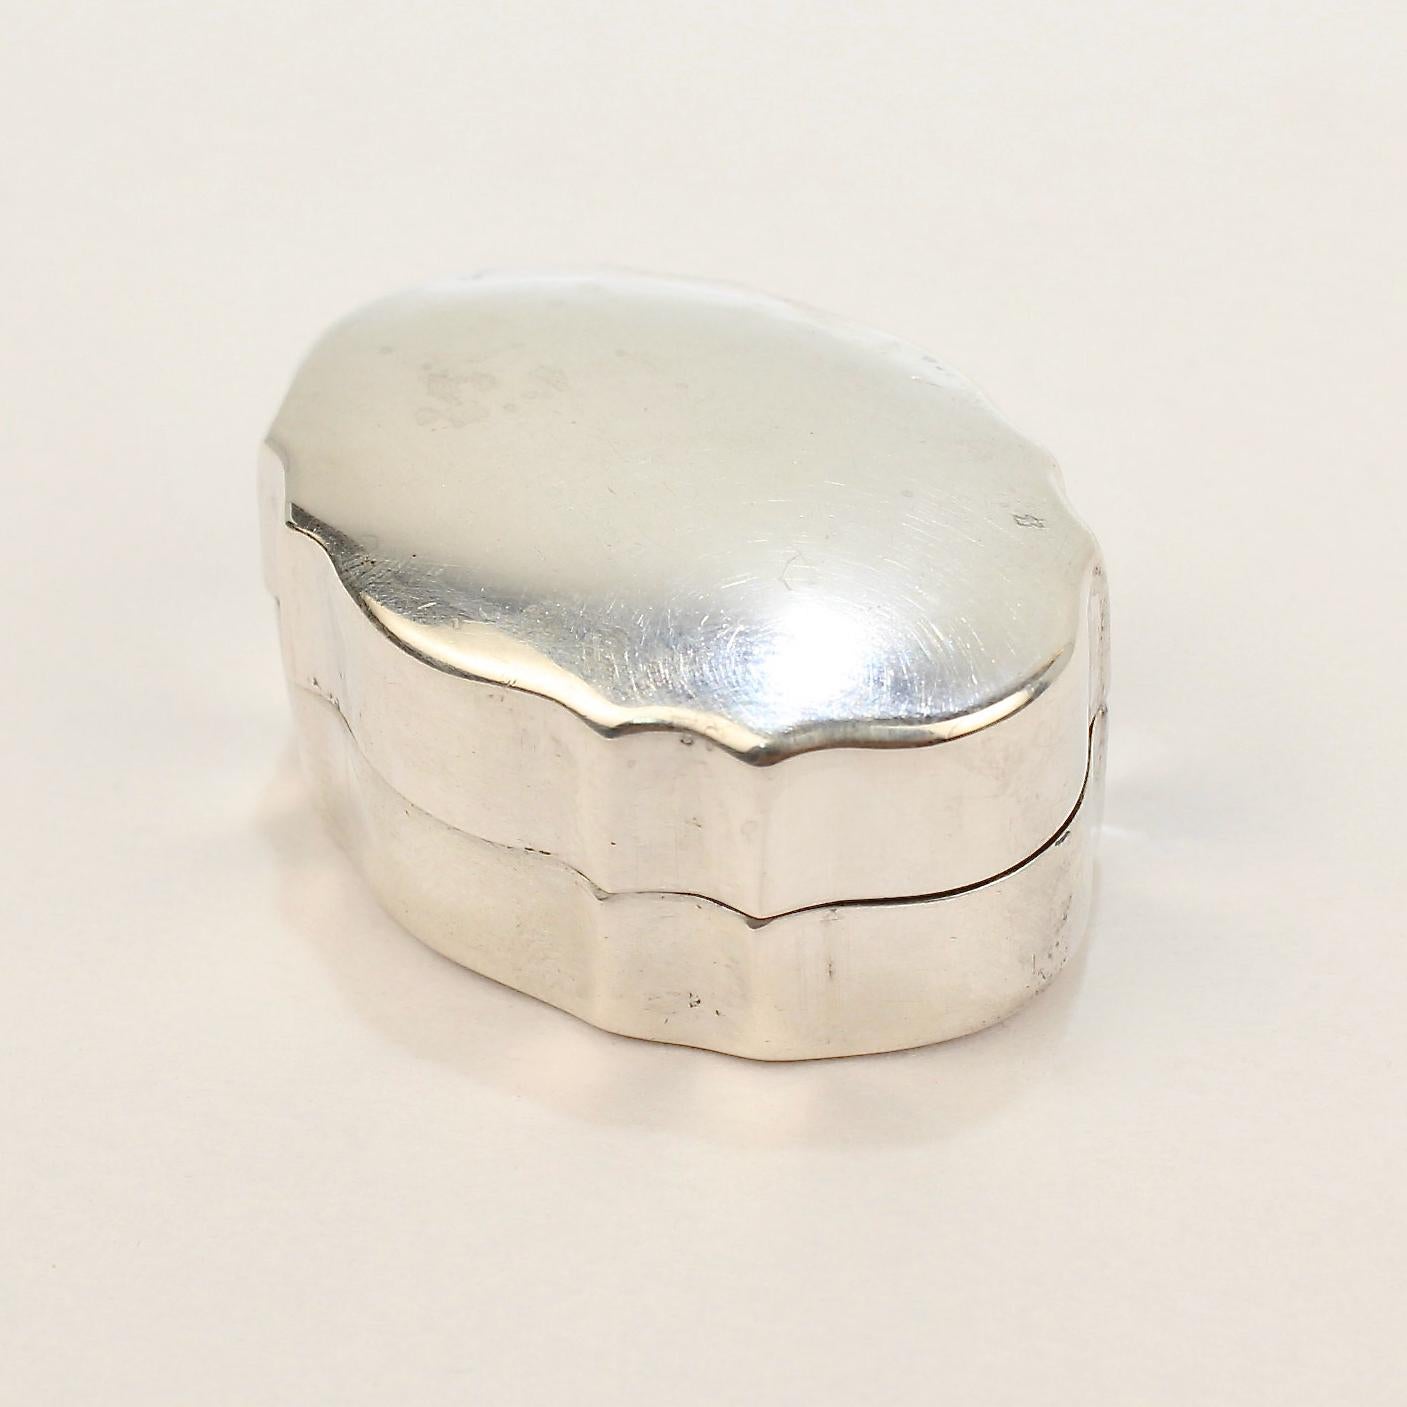 A fine sterling silver pill box by Gucci.

With shaped sides and a tight sealing lid.

Provenance: 
From the collection of the legendary interior decorator - Mario Buatta.

Date:
20th Century

Overall Condition:
It is in overall good, as-pictured,